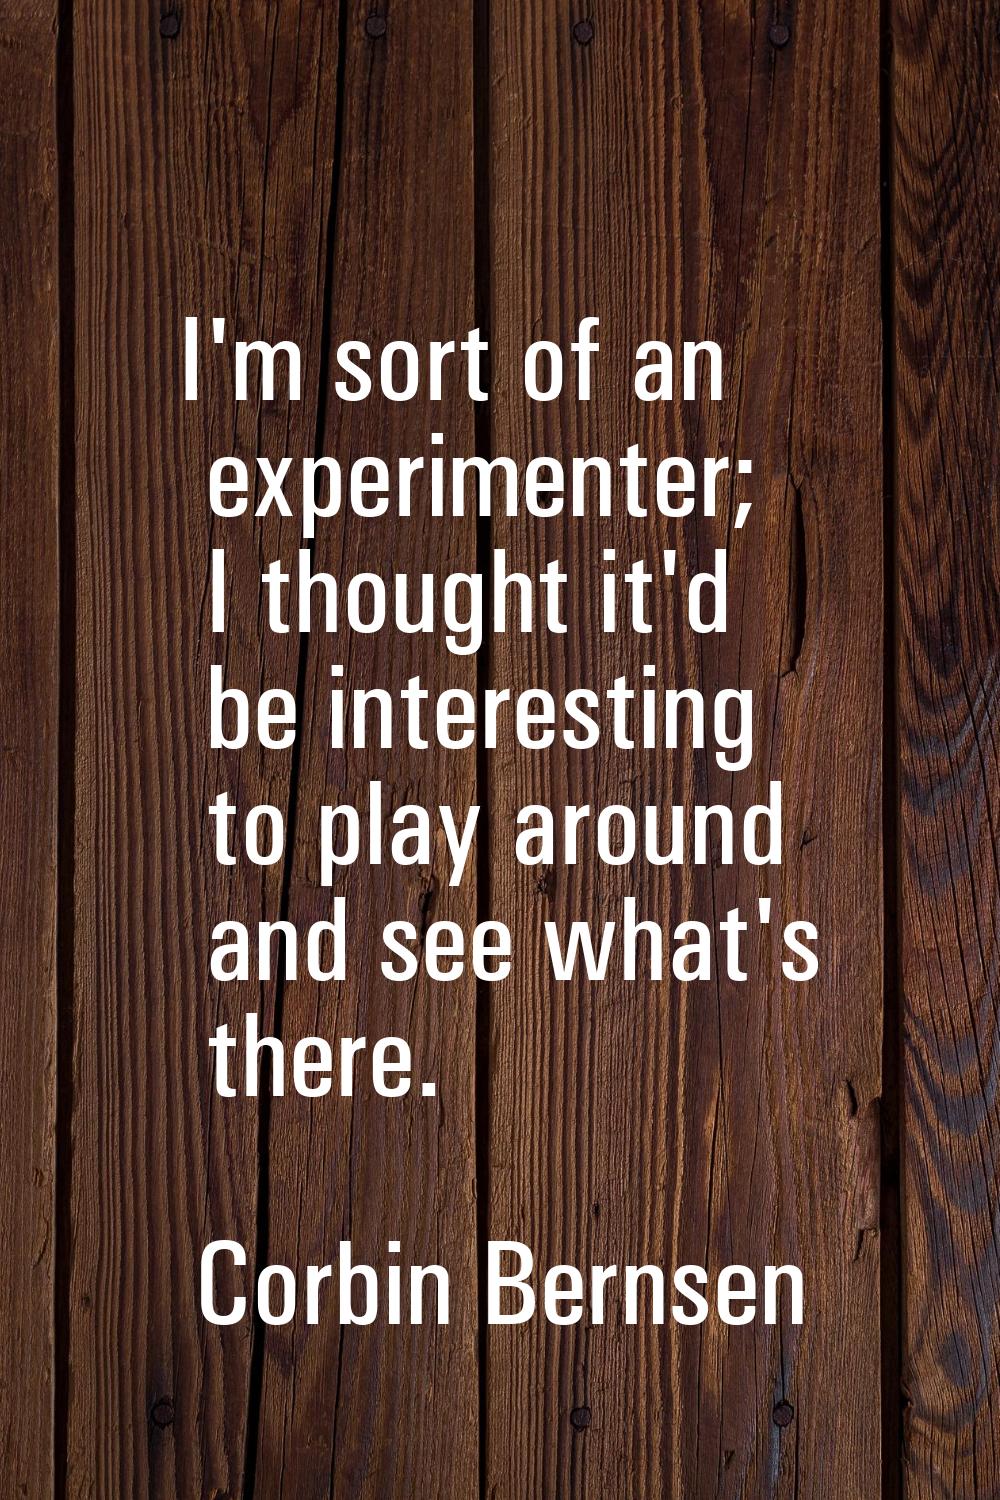 I'm sort of an experimenter; I thought it'd be interesting to play around and see what's there.